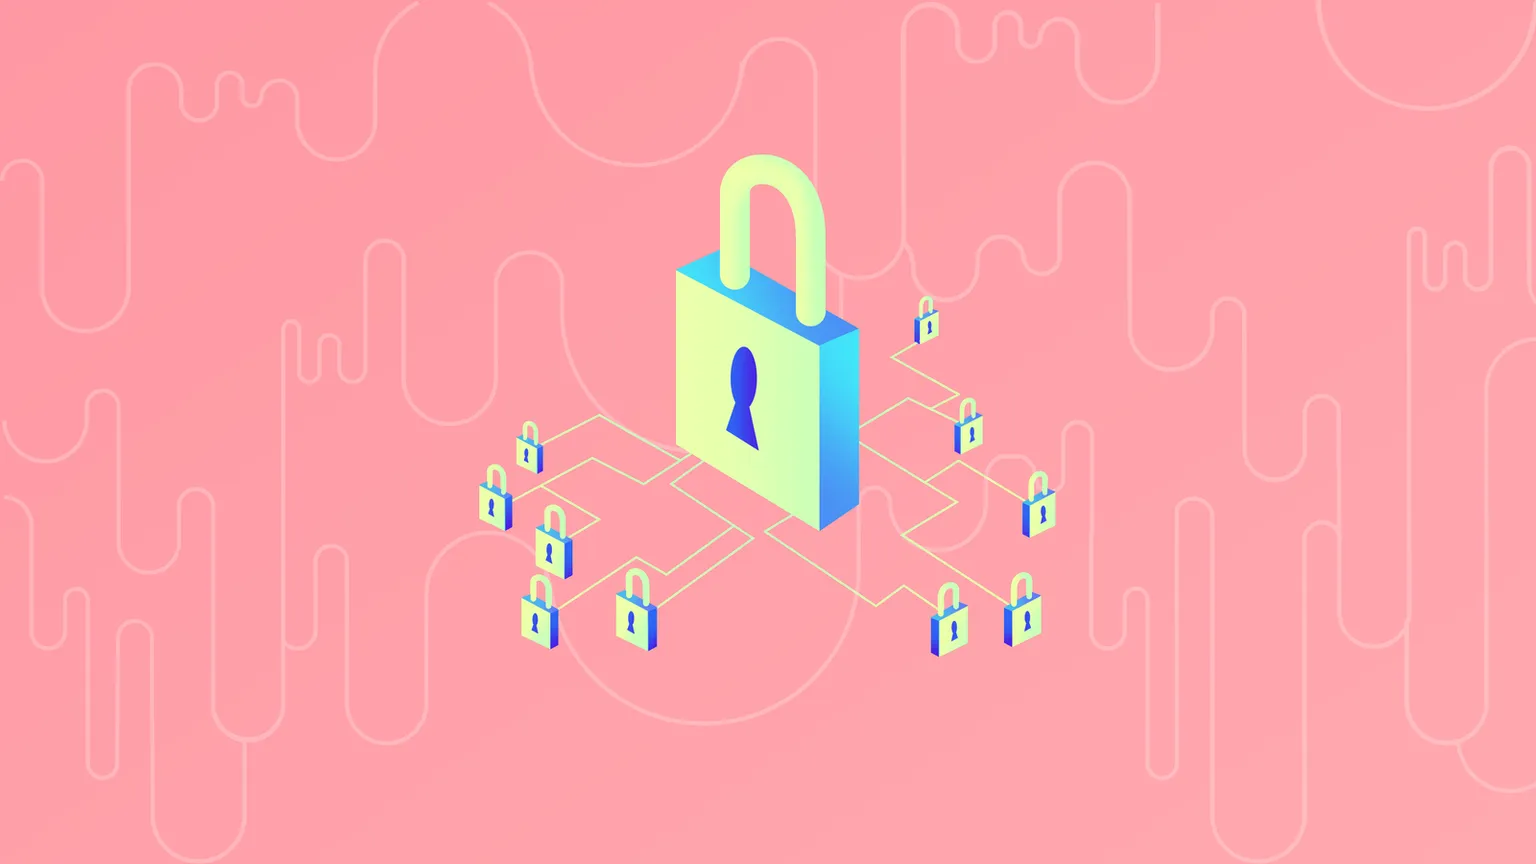 Privacy coins. Image: Grant Kempster/Decrypt